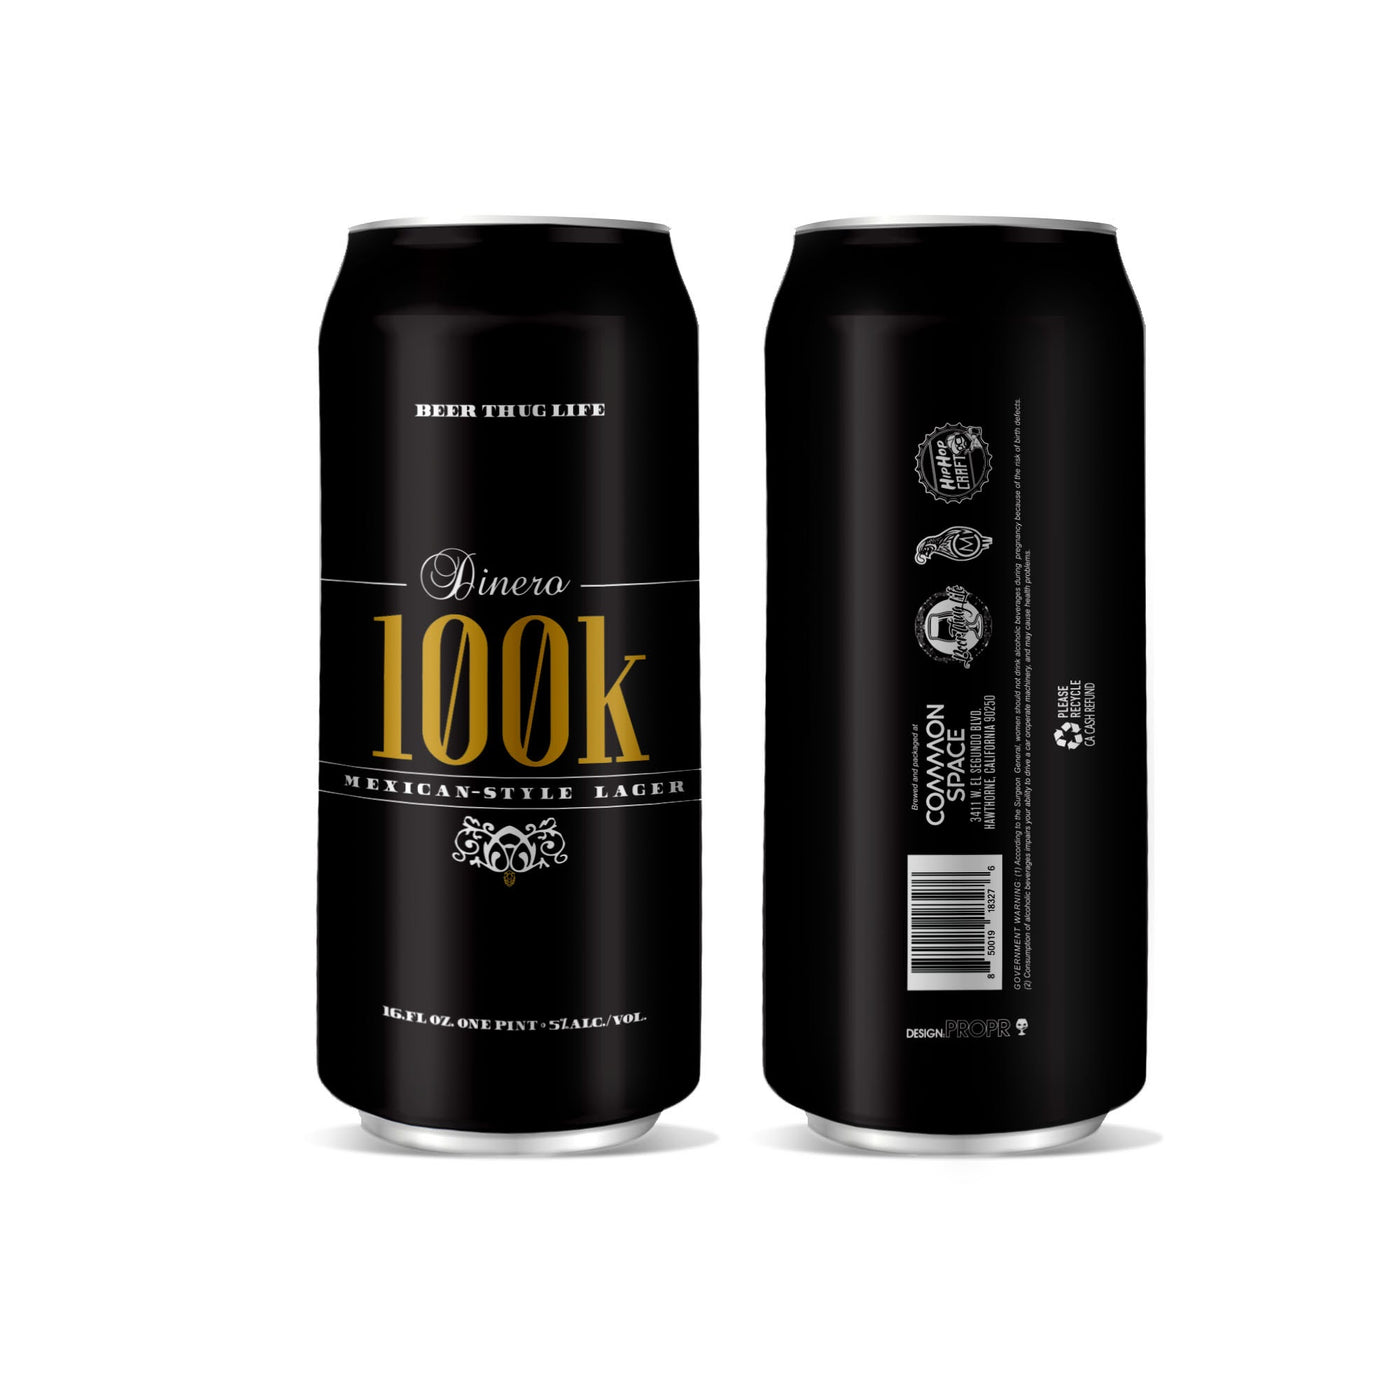 Dinero 100K Mexican Lager